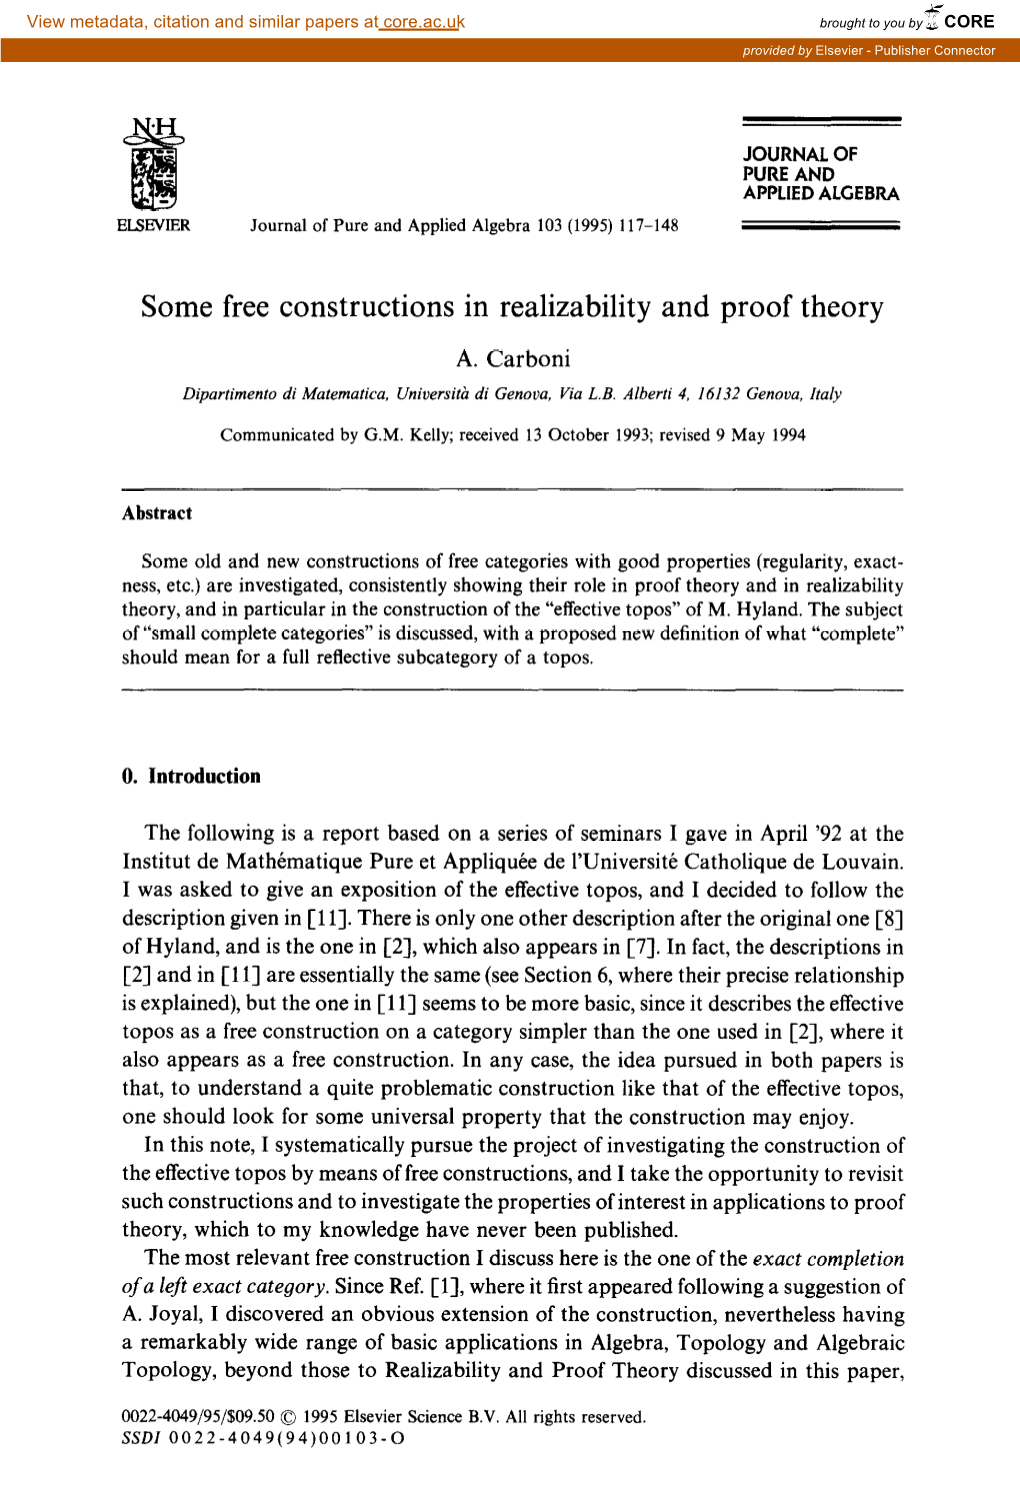 Some Free Constructions in Realizability and Proof Theory